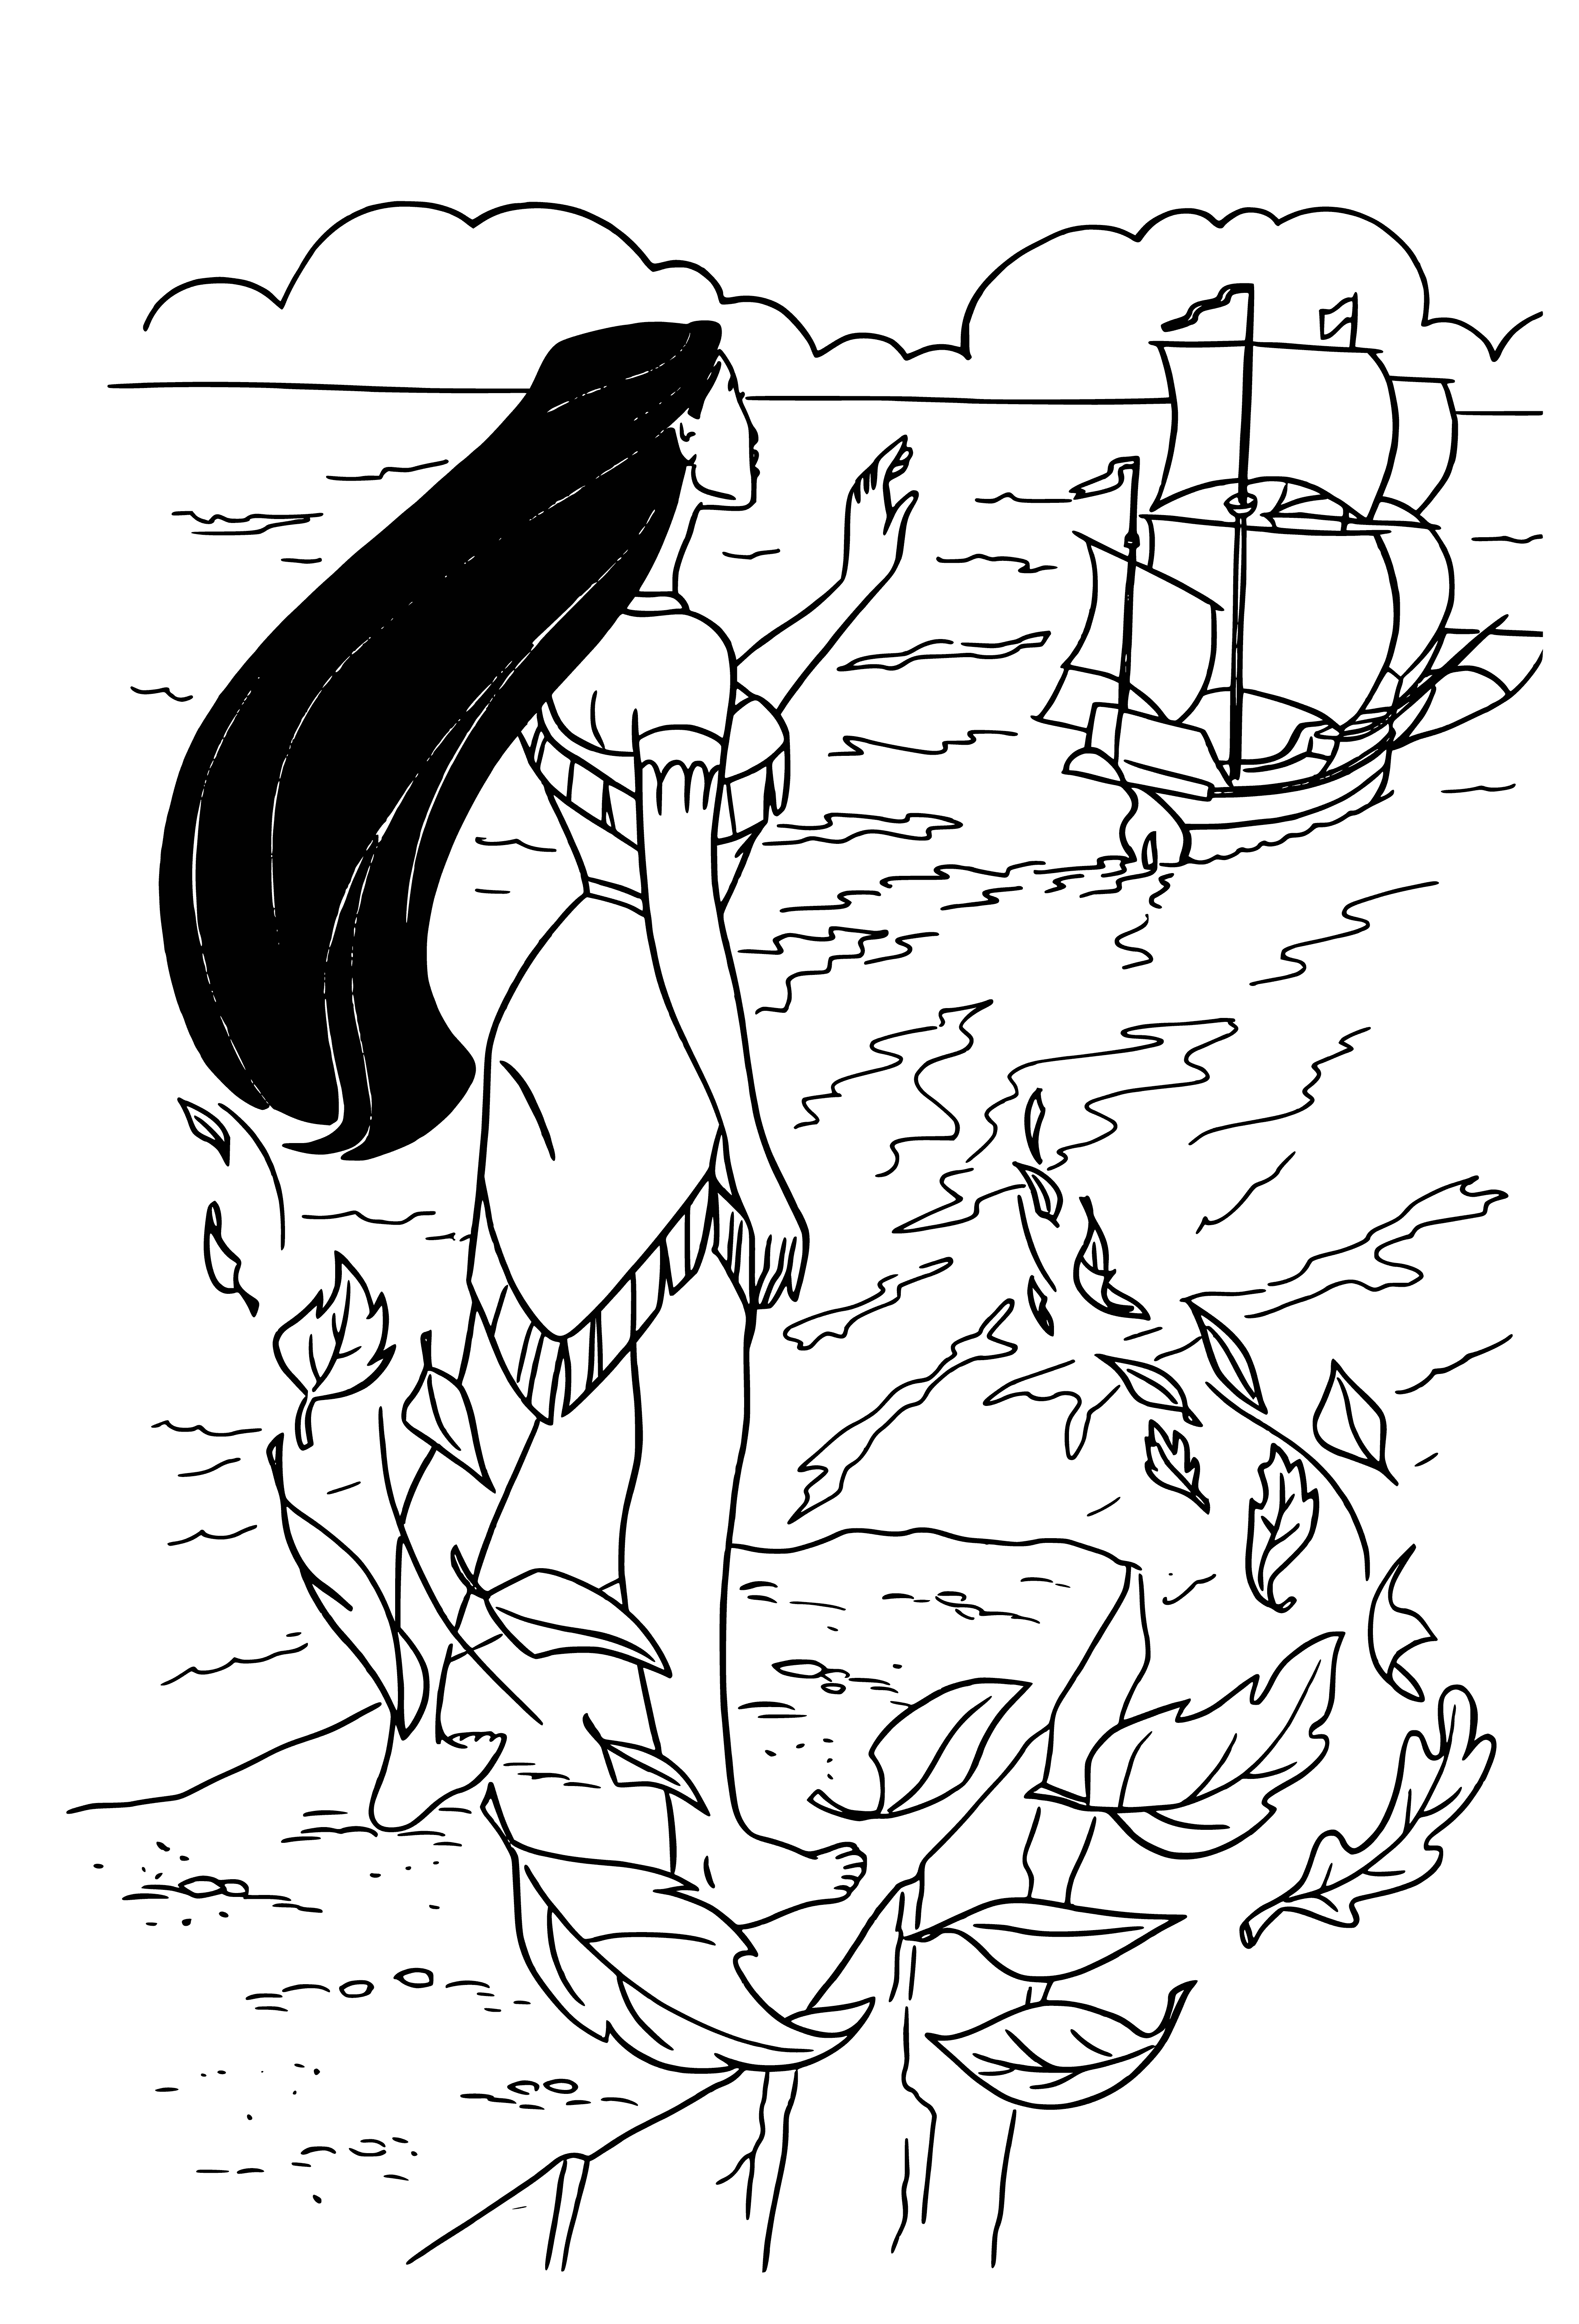 The ship sails away coloring page